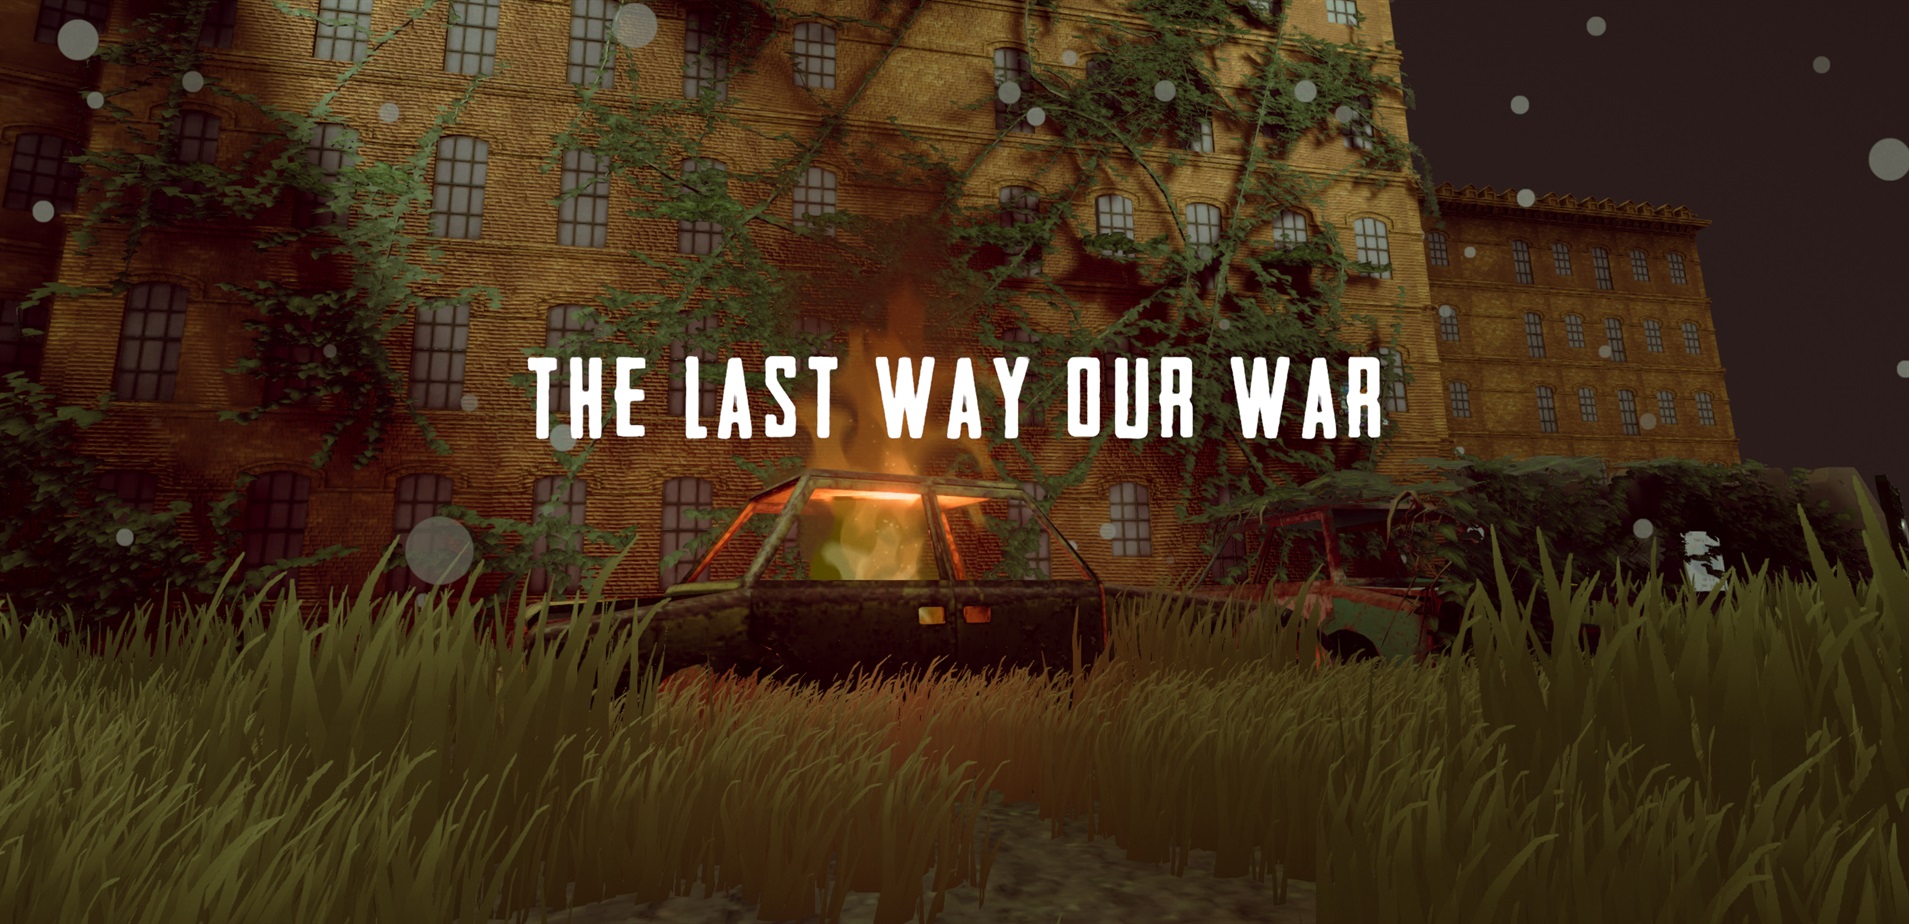 The Last Way, Our War